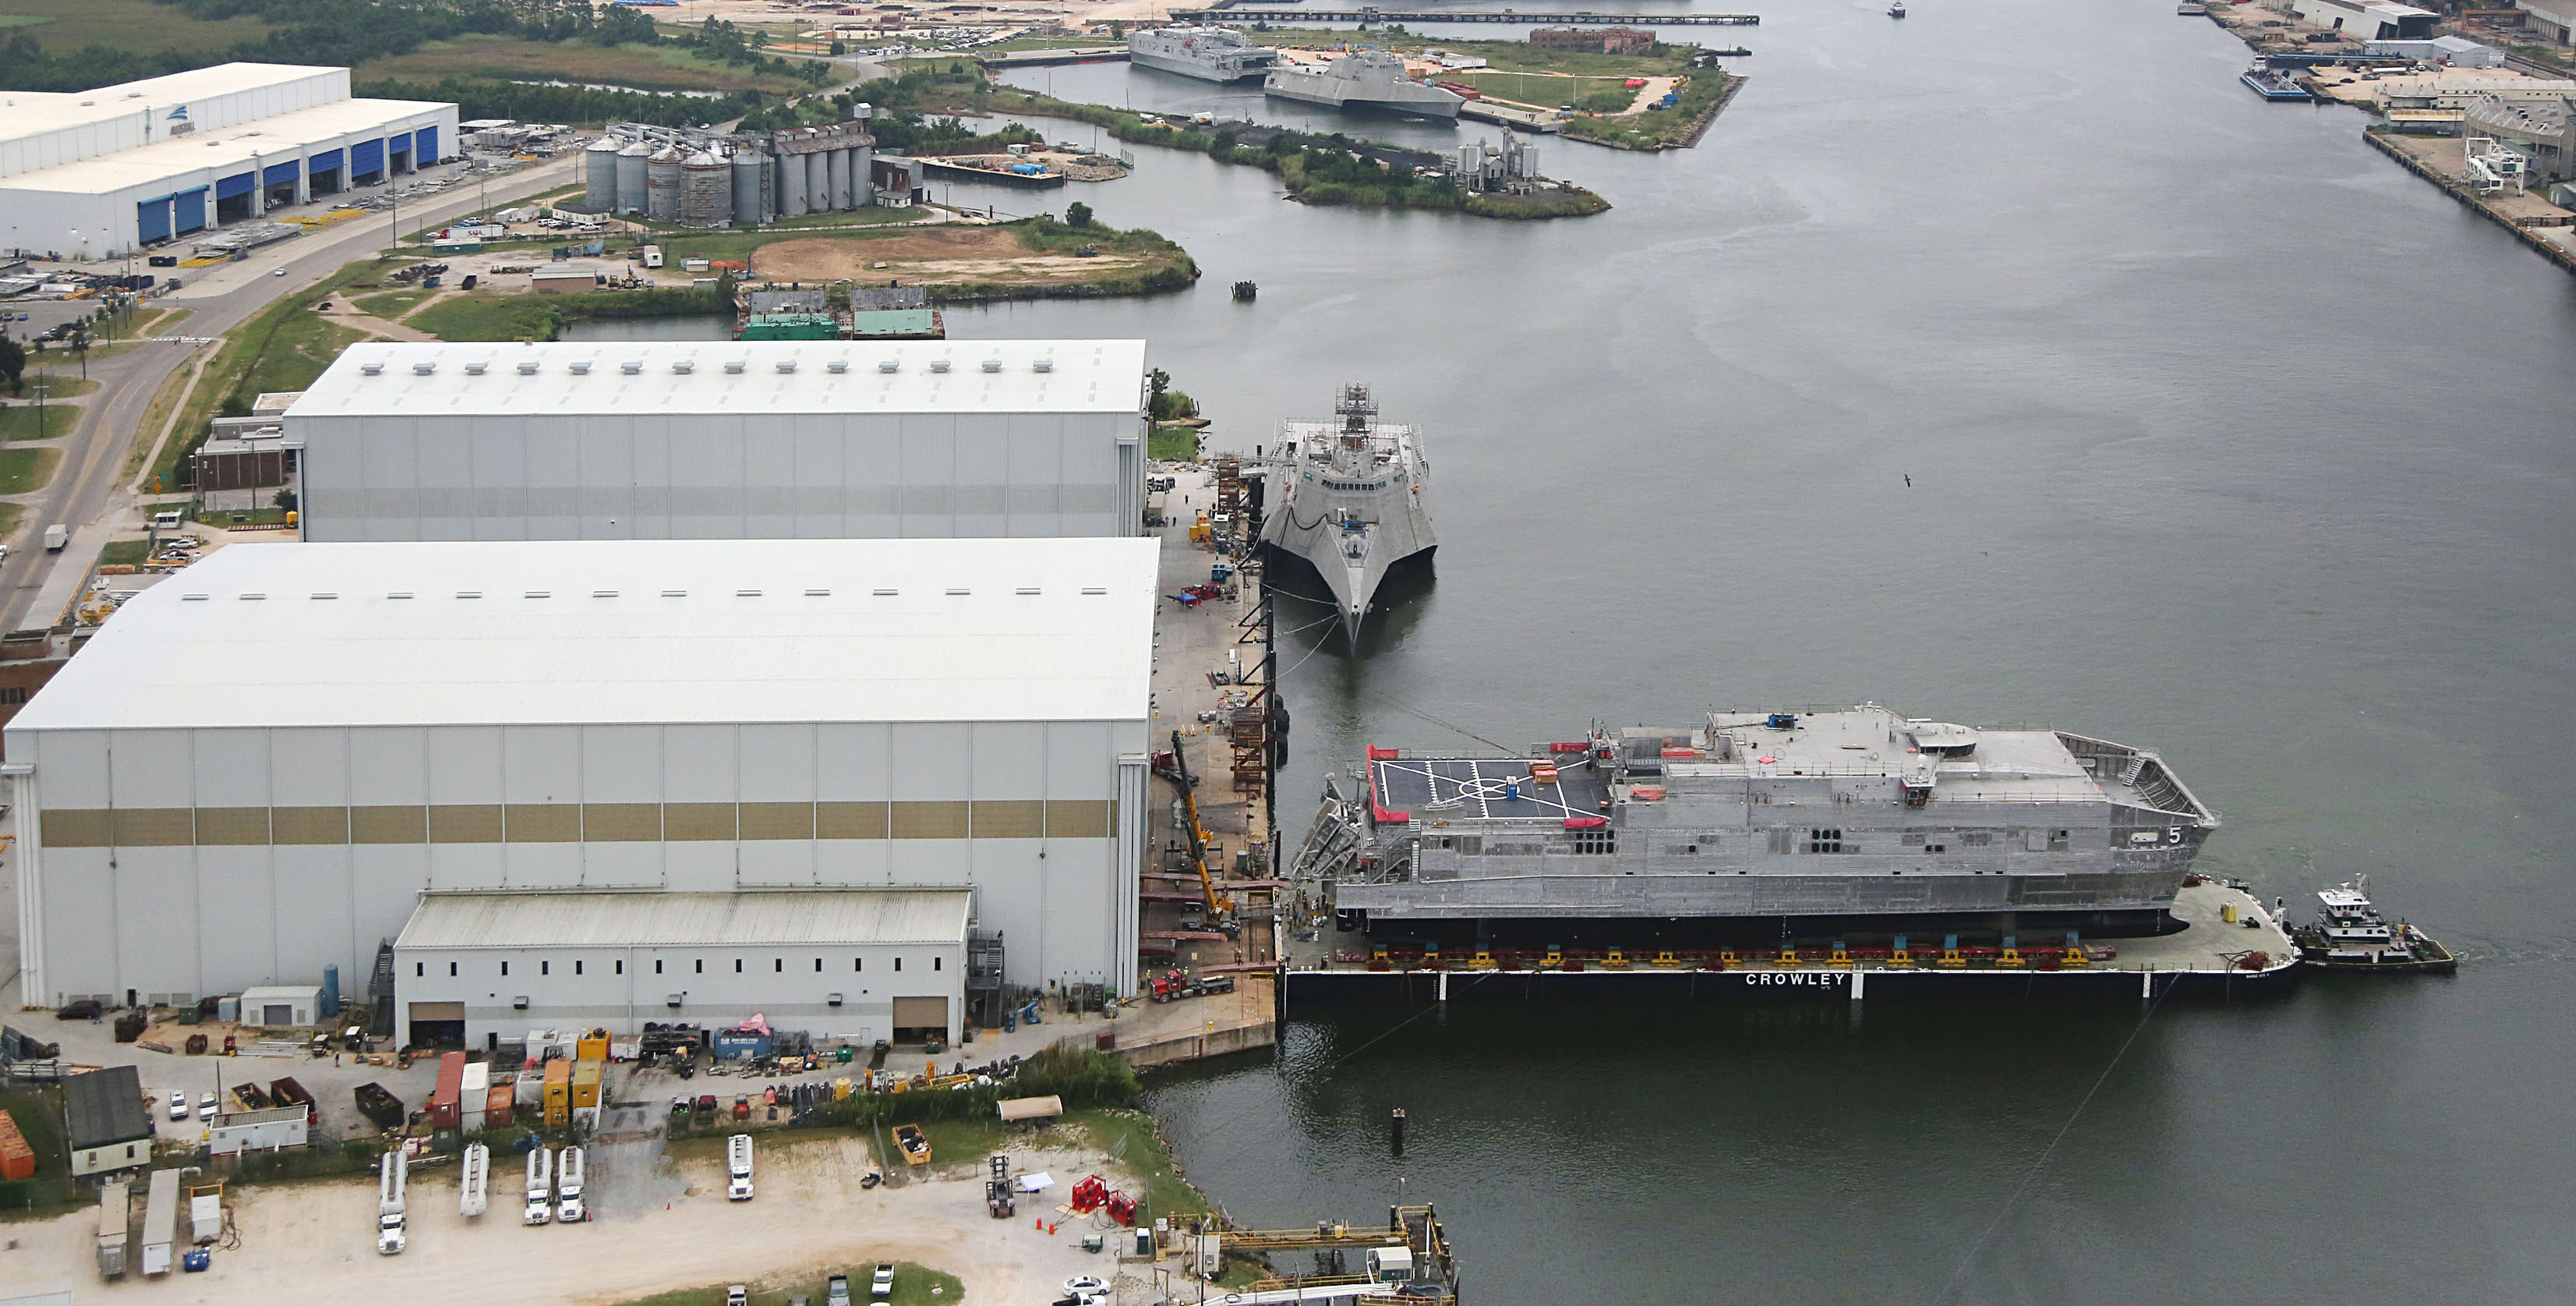 Trenton (JHSV-5) launching from Austal USA's shipbuilding facility in Mobile, Ala. in late 2014. Austal USA Photo